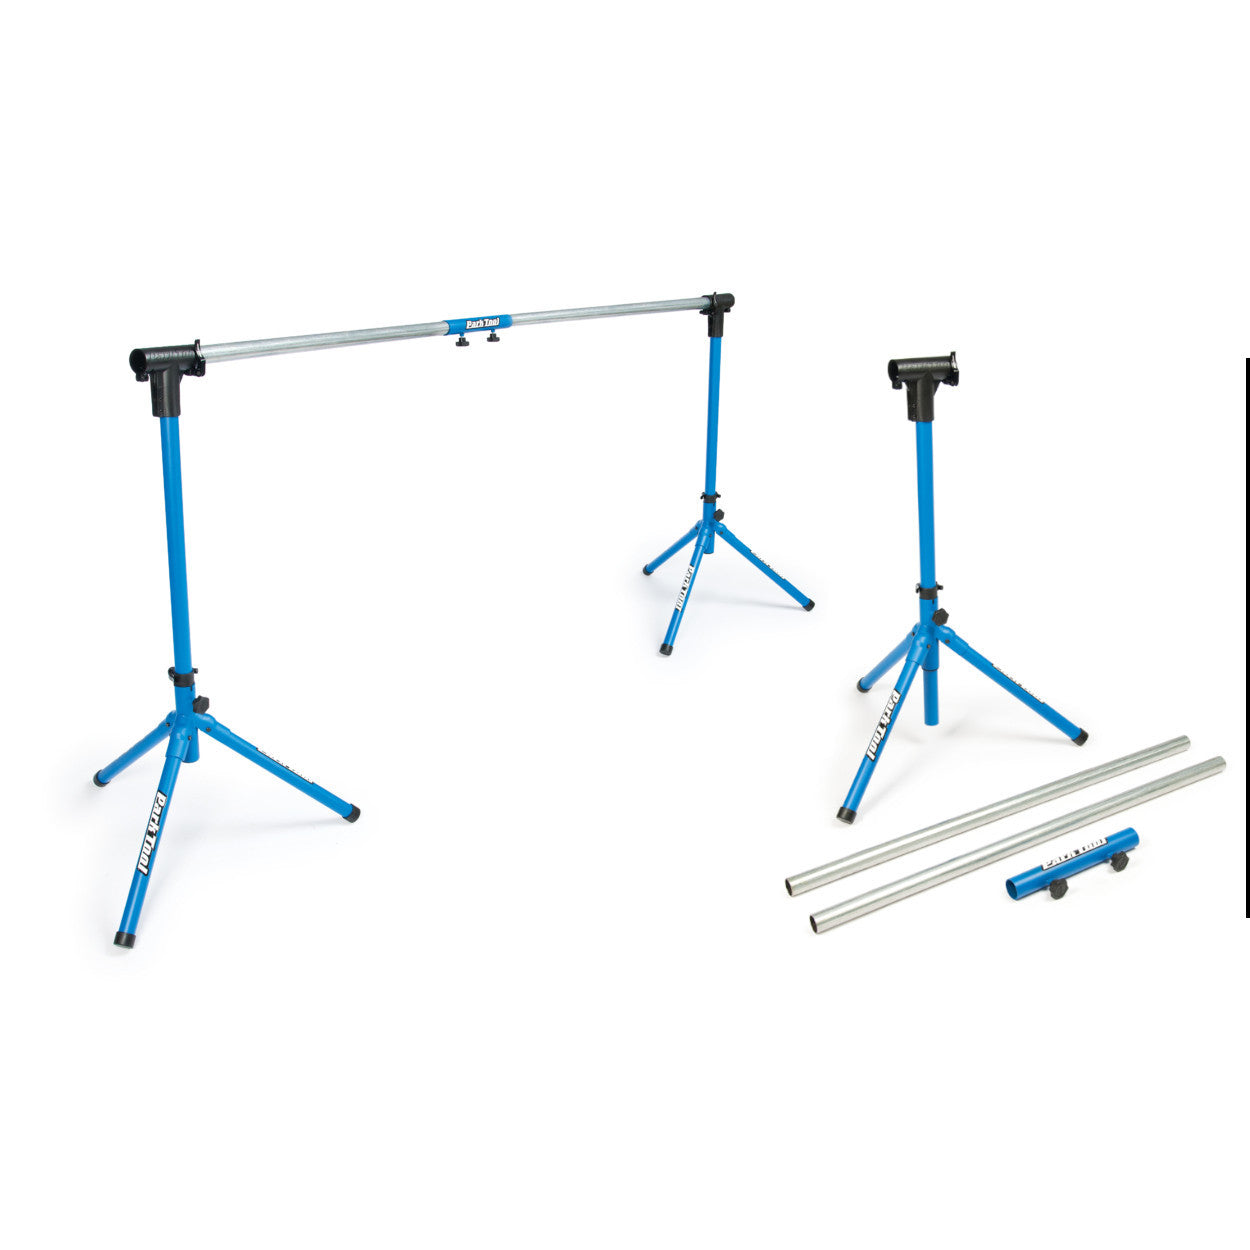 Park Tool ES-2 Event Stand Add-On Kit